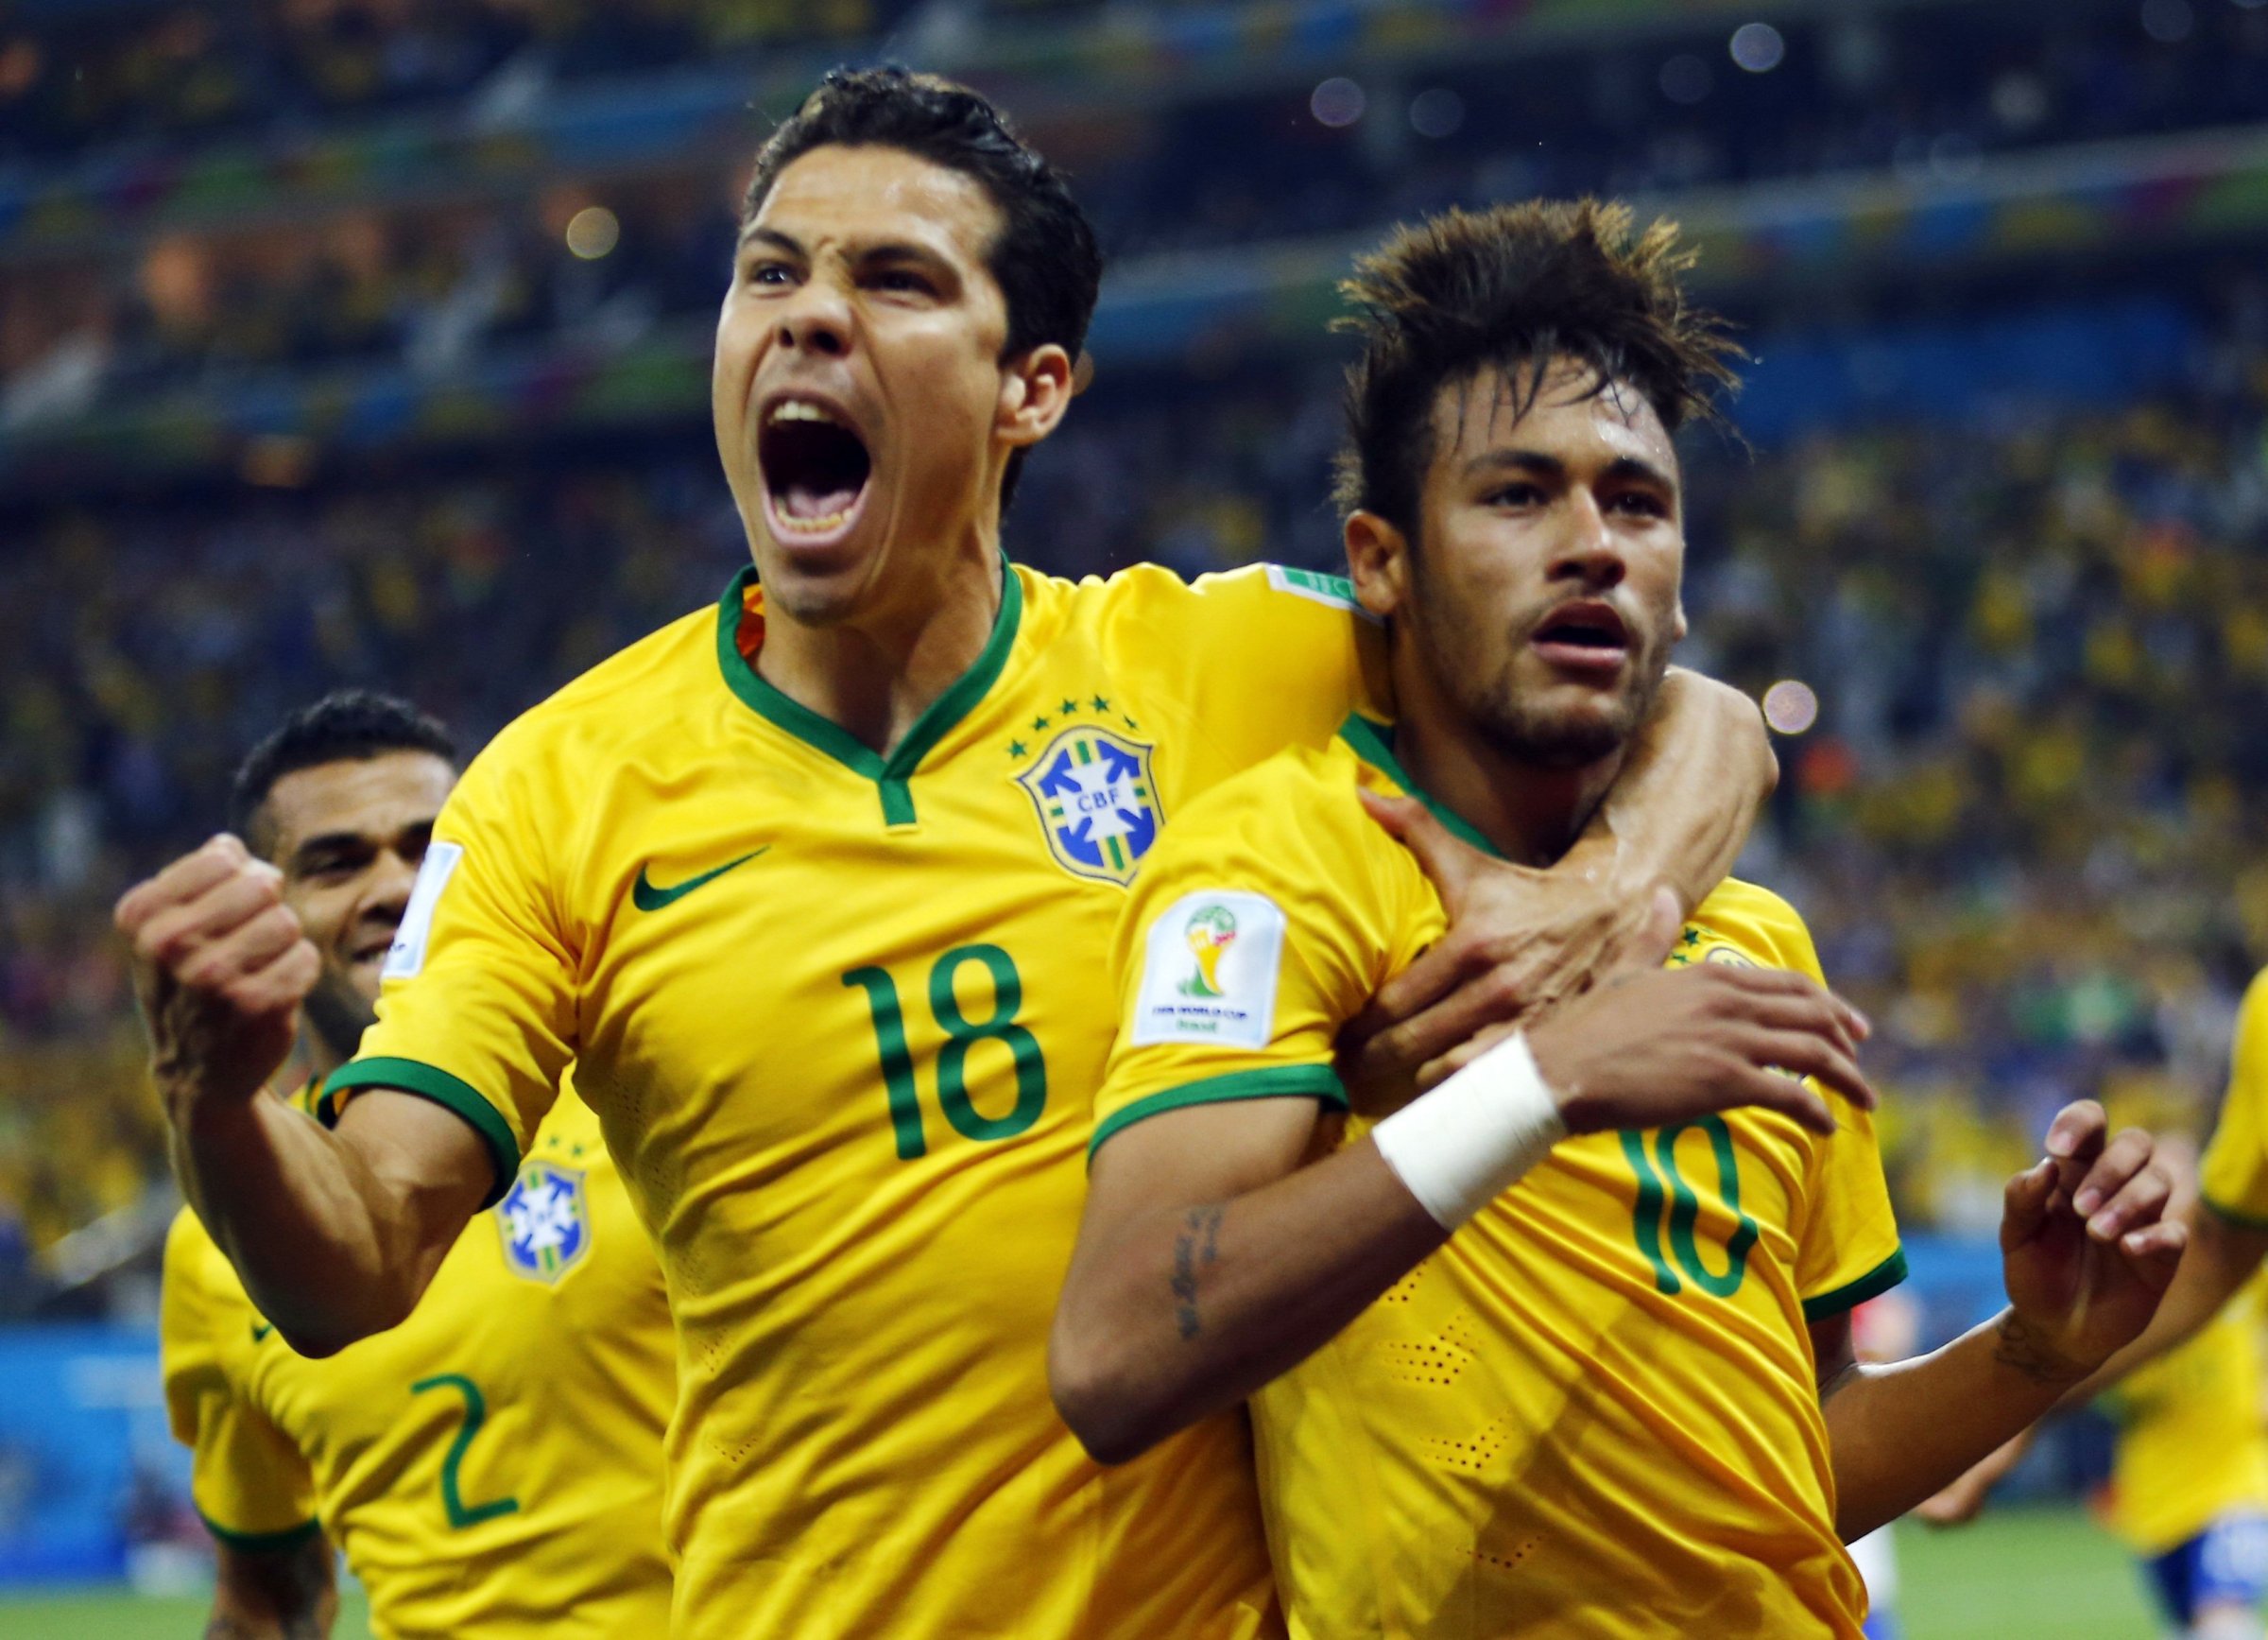 Brazil's Neymar and Hernanes celebrate after Neymar scored a goal from a penalty kick during the 2014 World Cup opening match against Croatia at the Corinthians arena in Sao Paulo